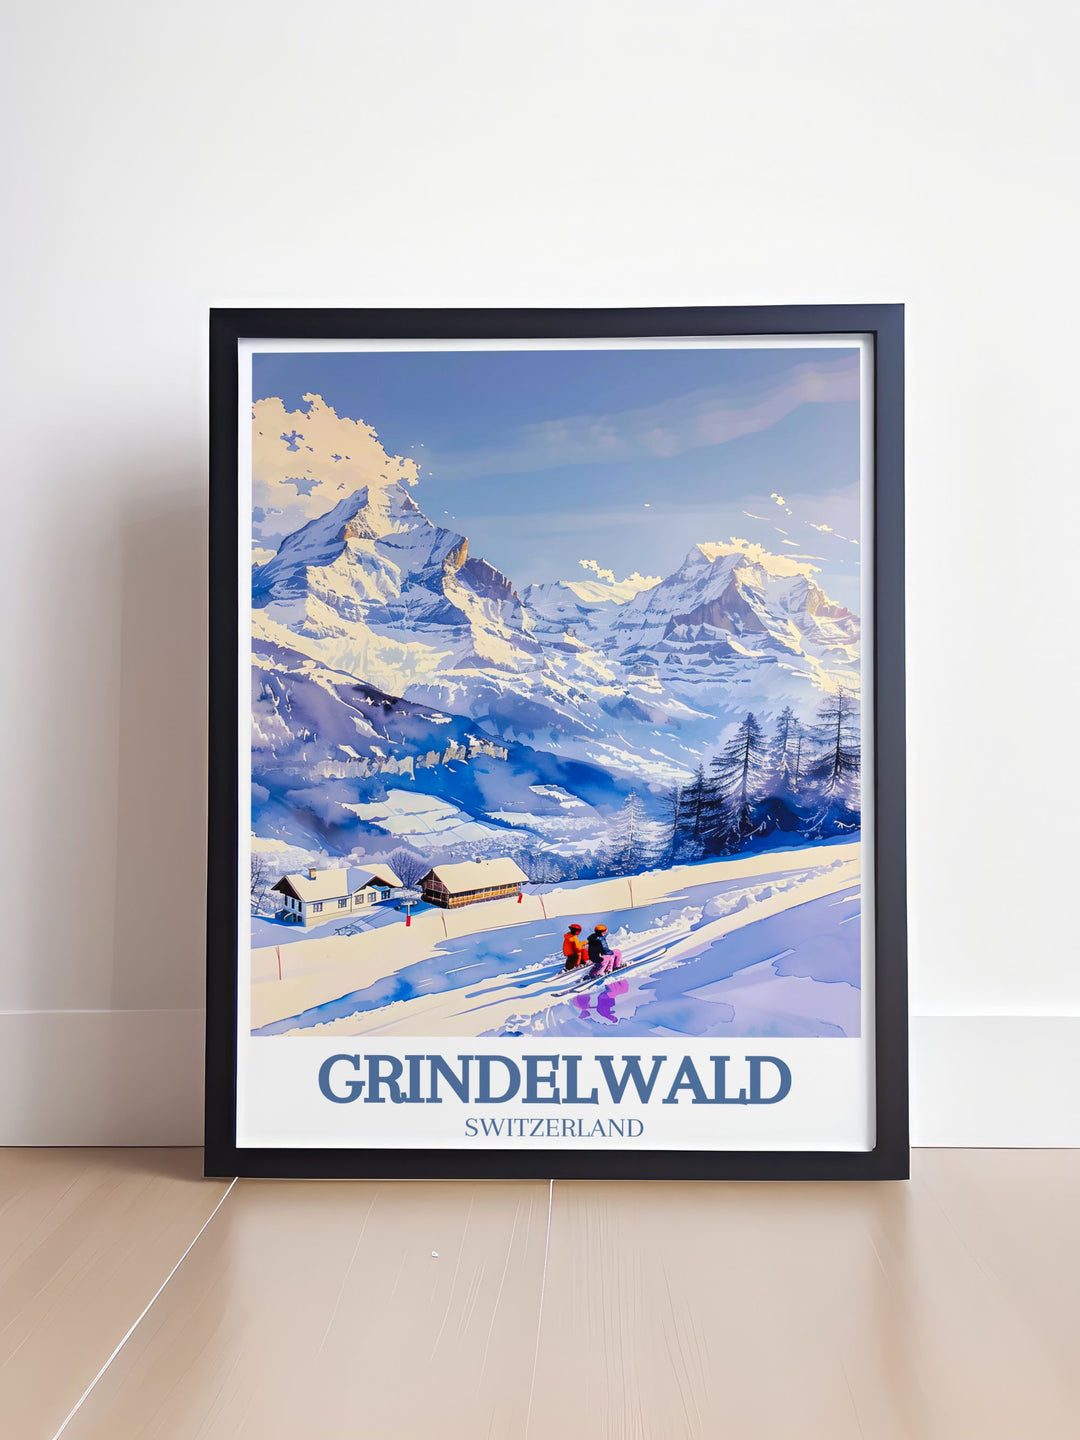 Highlighting the rich history and scenic charm of Grindelwald Ski Resort, this poster offers a glimpse into the elegance and beauty of this iconic alpine destination, ideal for your home decor.